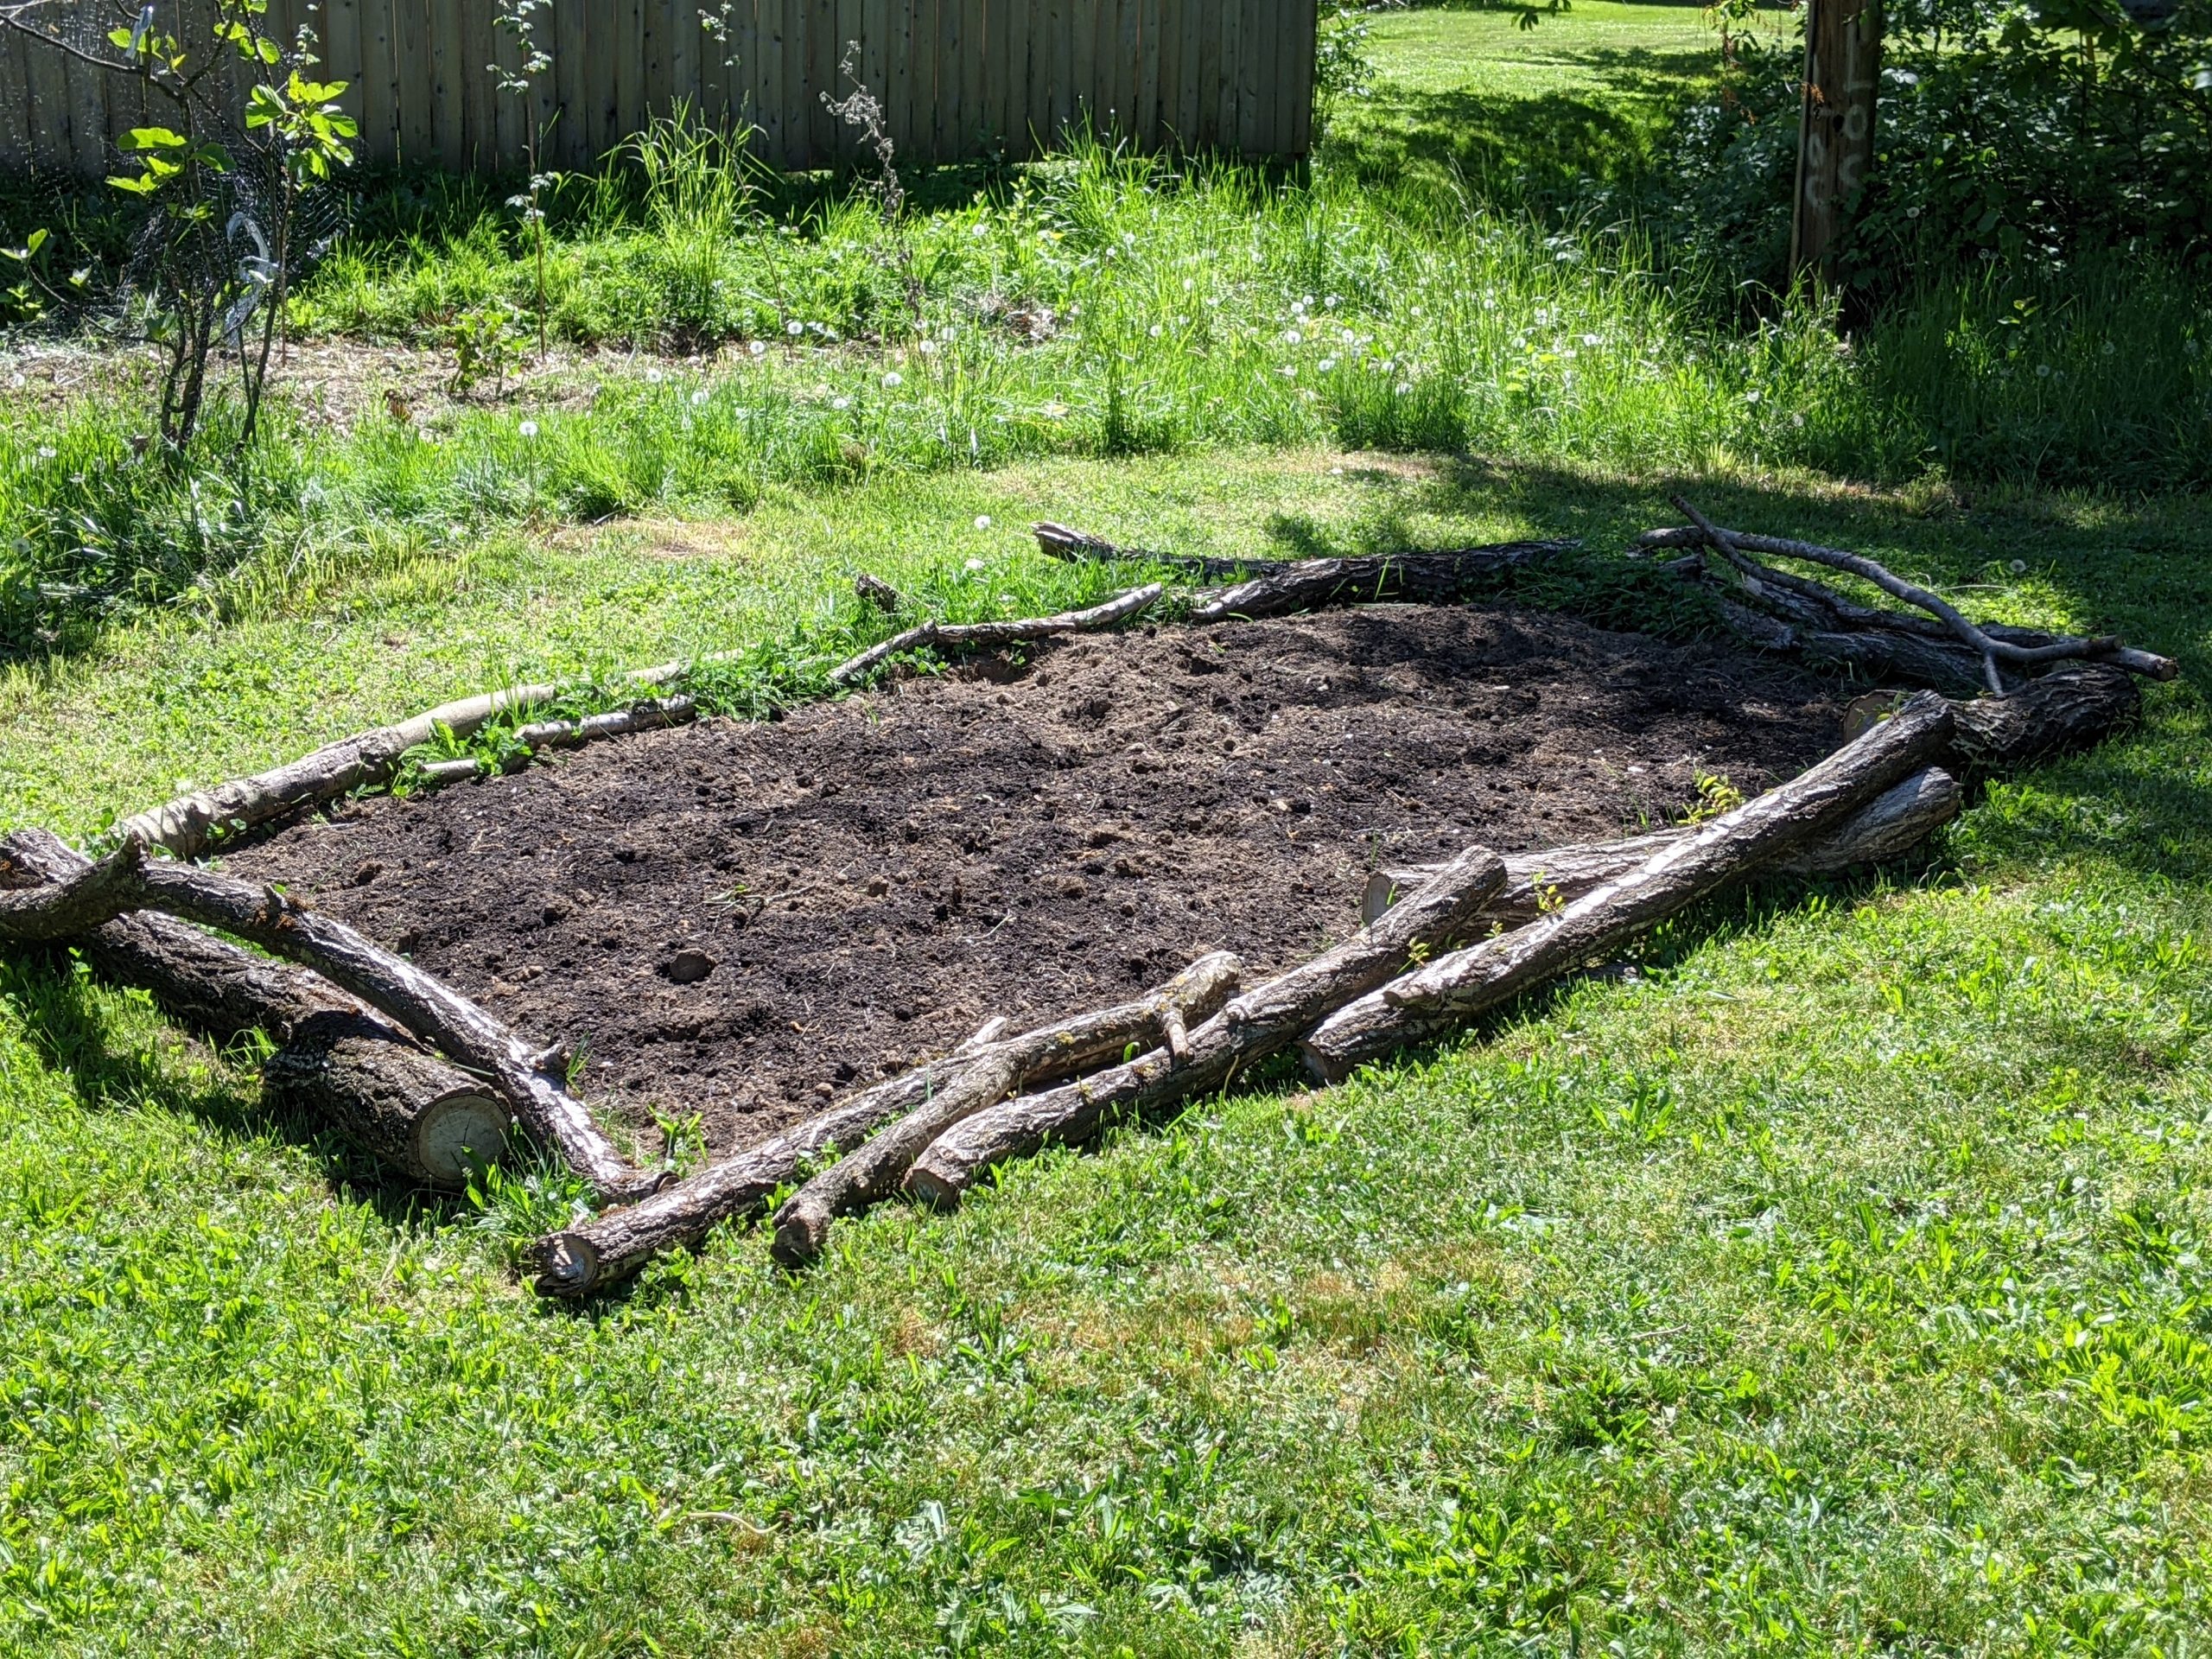 Logs and branches line this garden bed